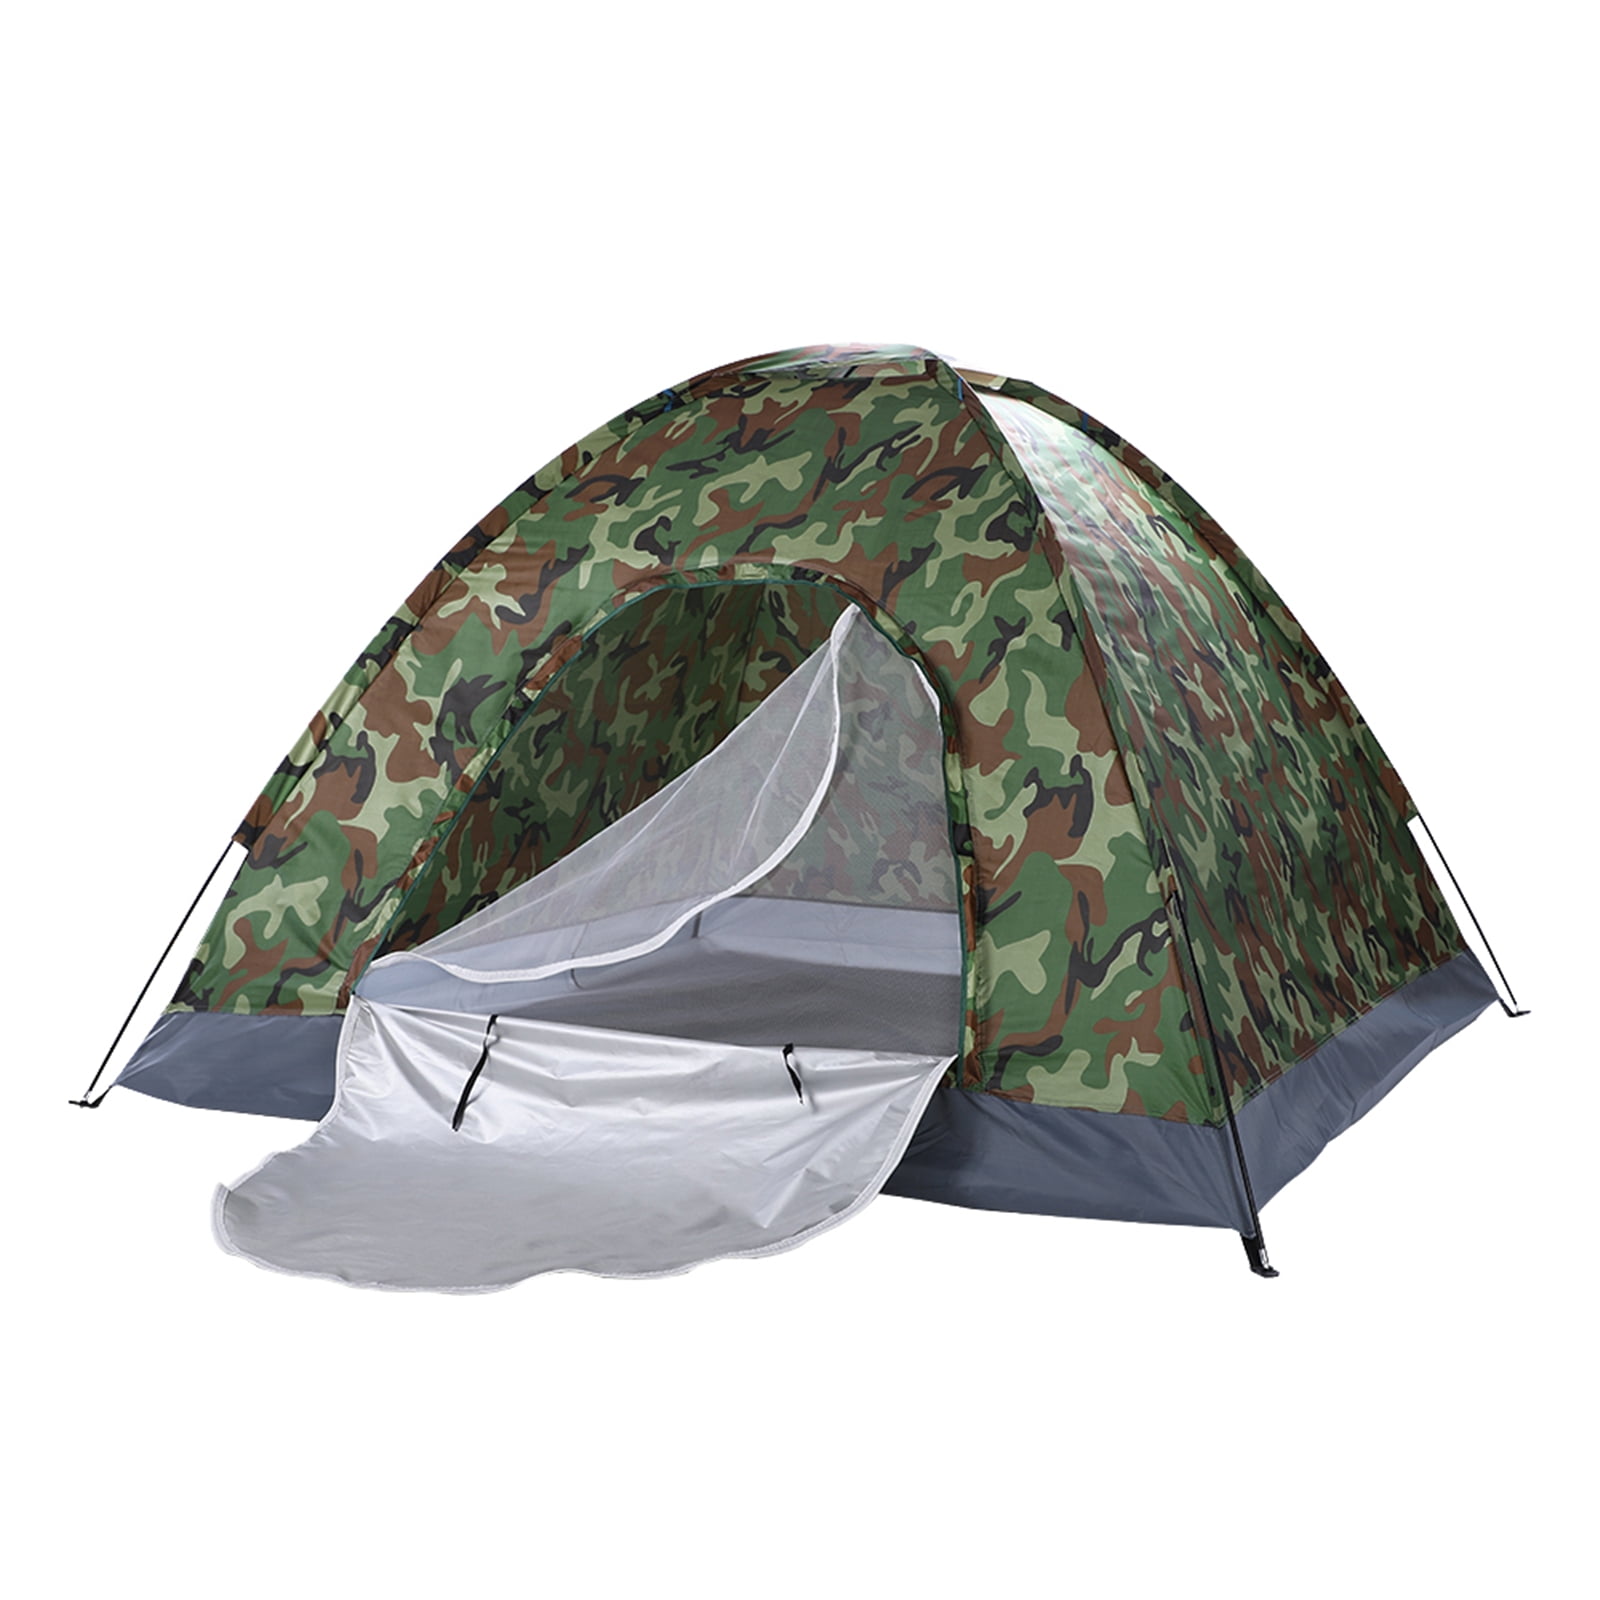 Pop Up Tent Beach Tent,2-3 Person Camping Tent Camouflage Dome Tent Camping Tent